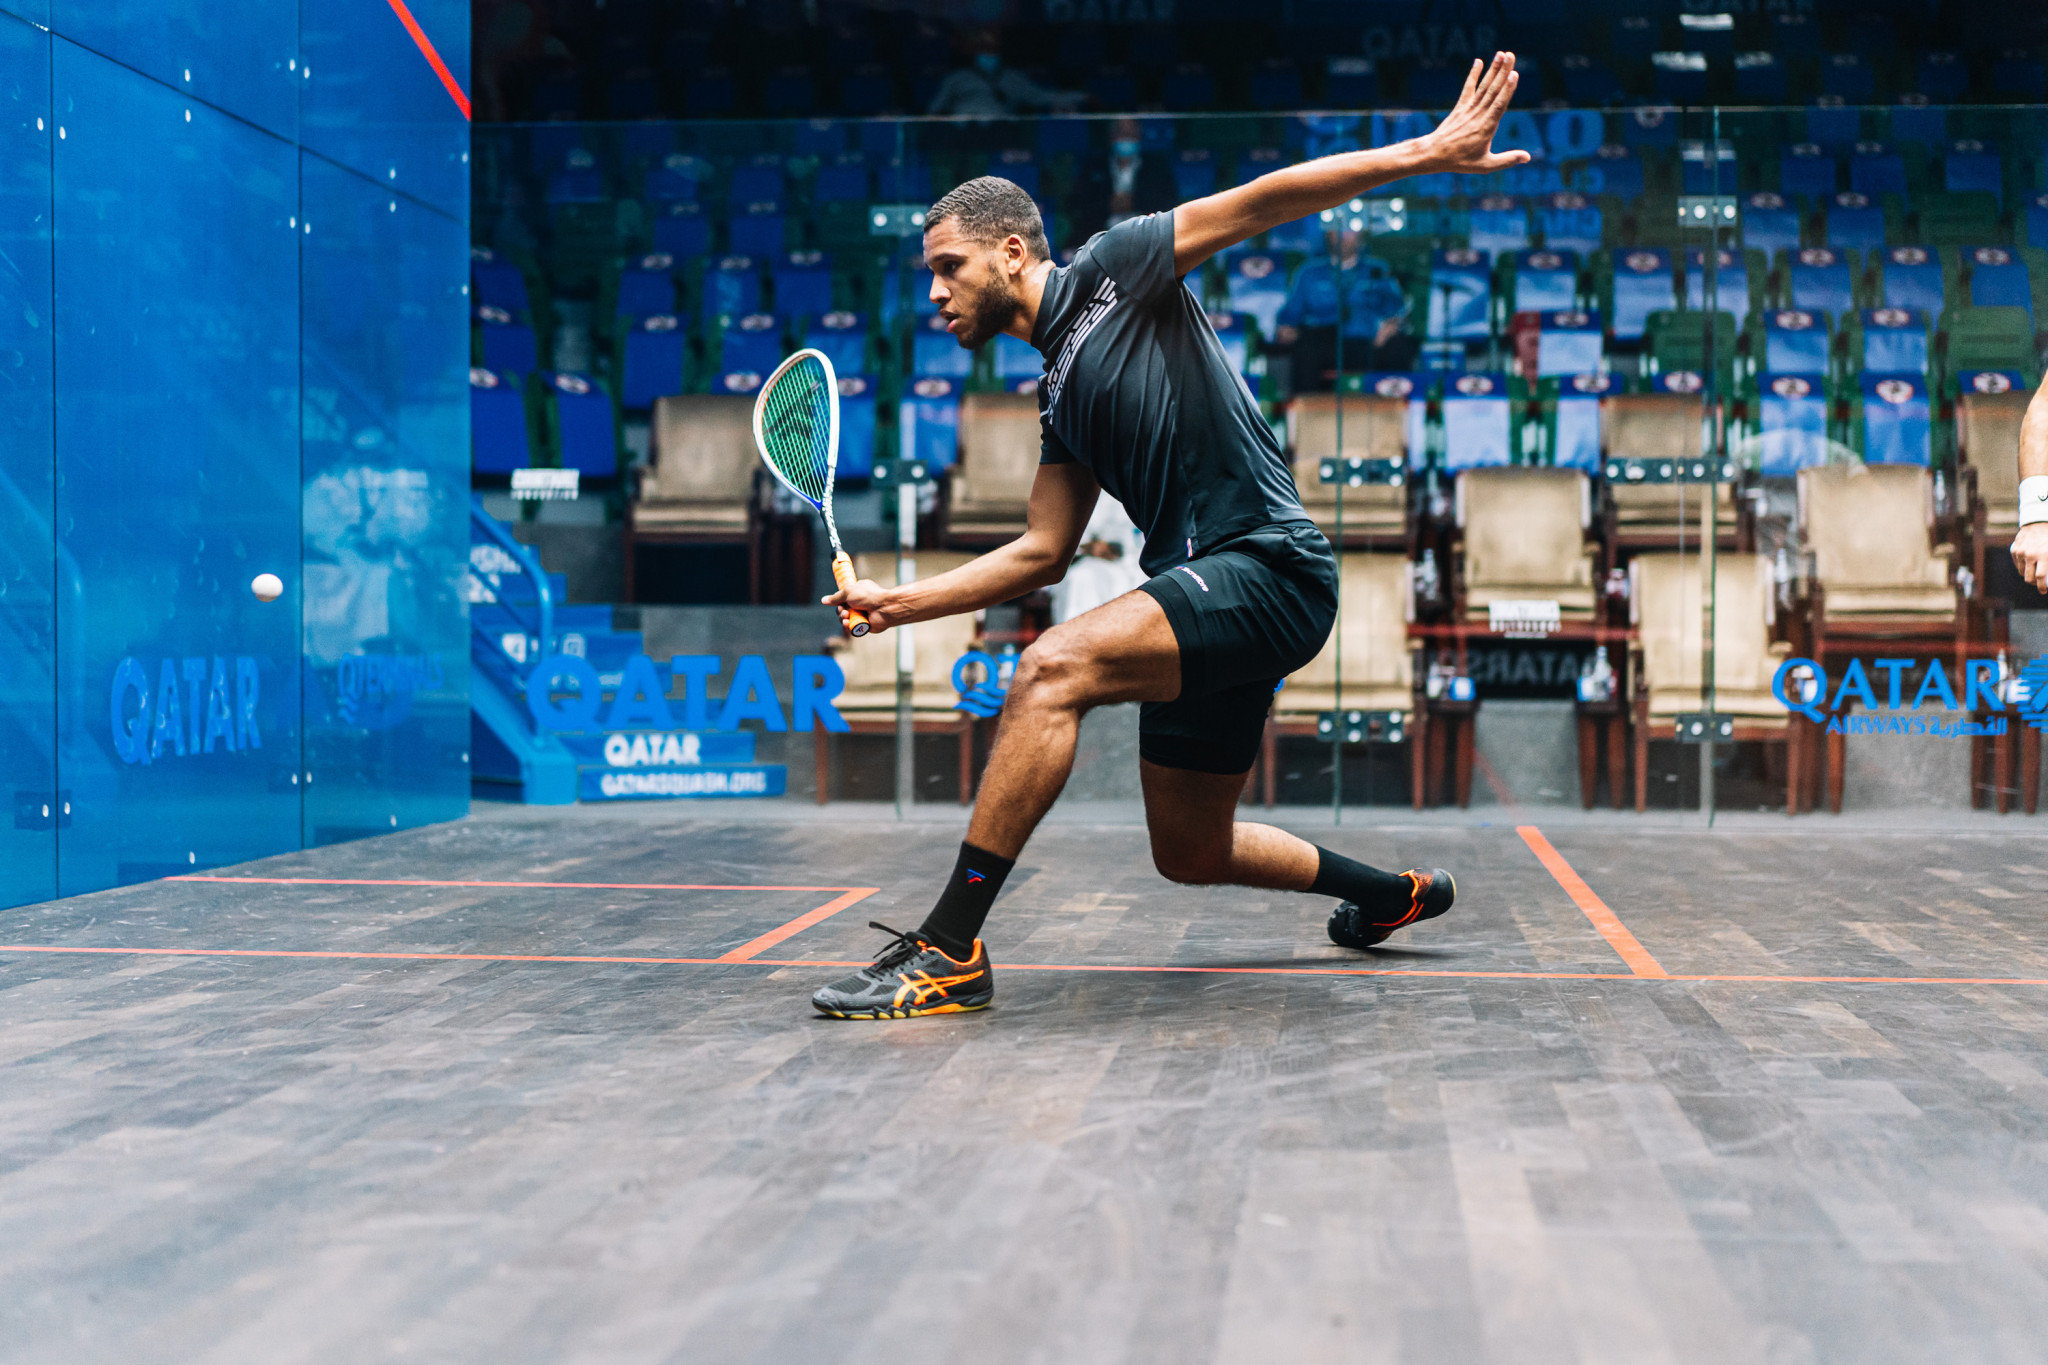 England's Richie Fallows beat Tayyab Aslam in the first round of the PSA Qatar Classic ©PSA